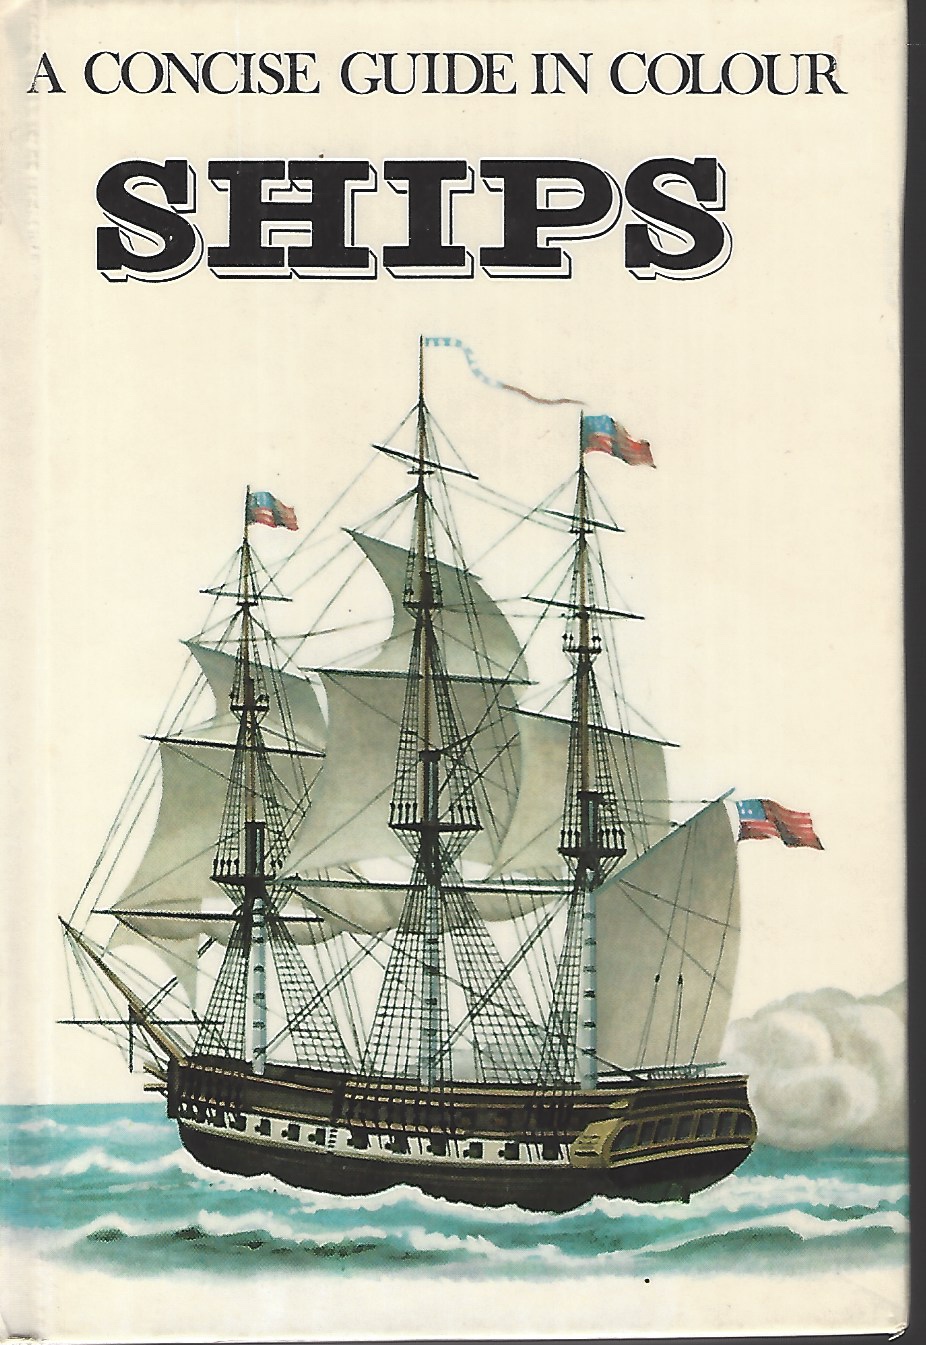 KOZAK JAROMIR ING. - Ships: A Concise Guide in Colour